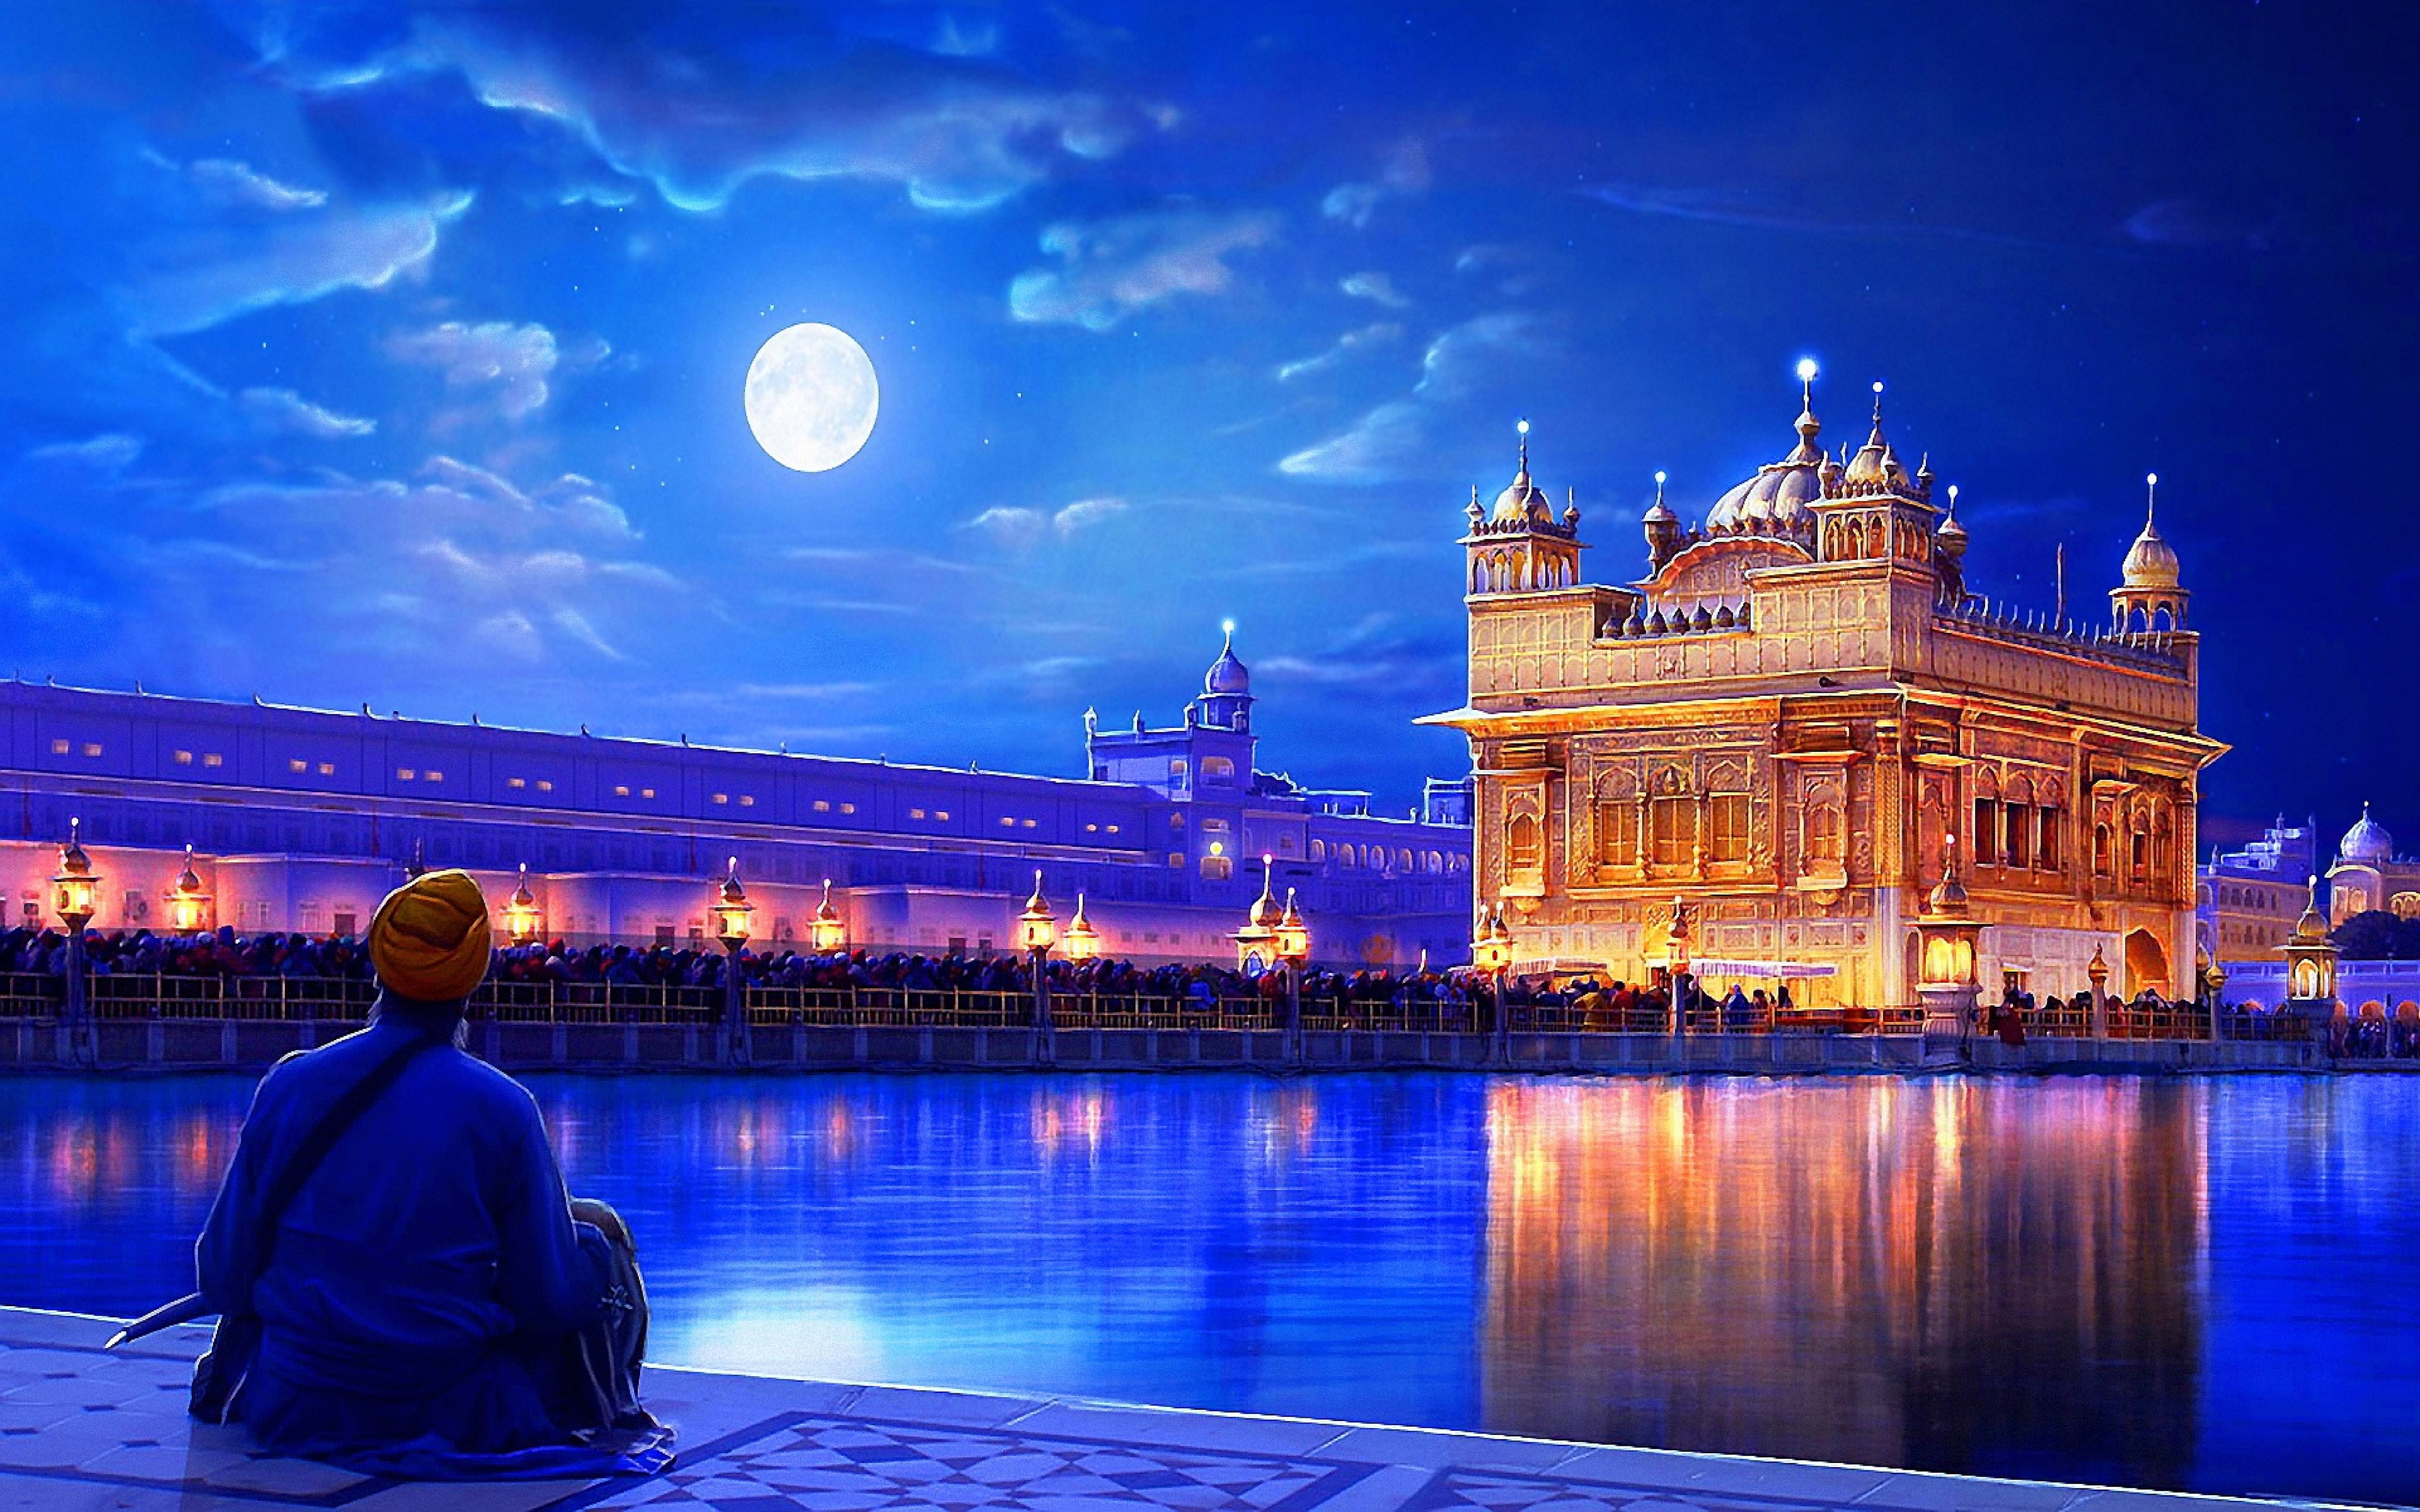 Golden Temple Amritsar India for 8192 x 5120 8K Ultra Wide resolution